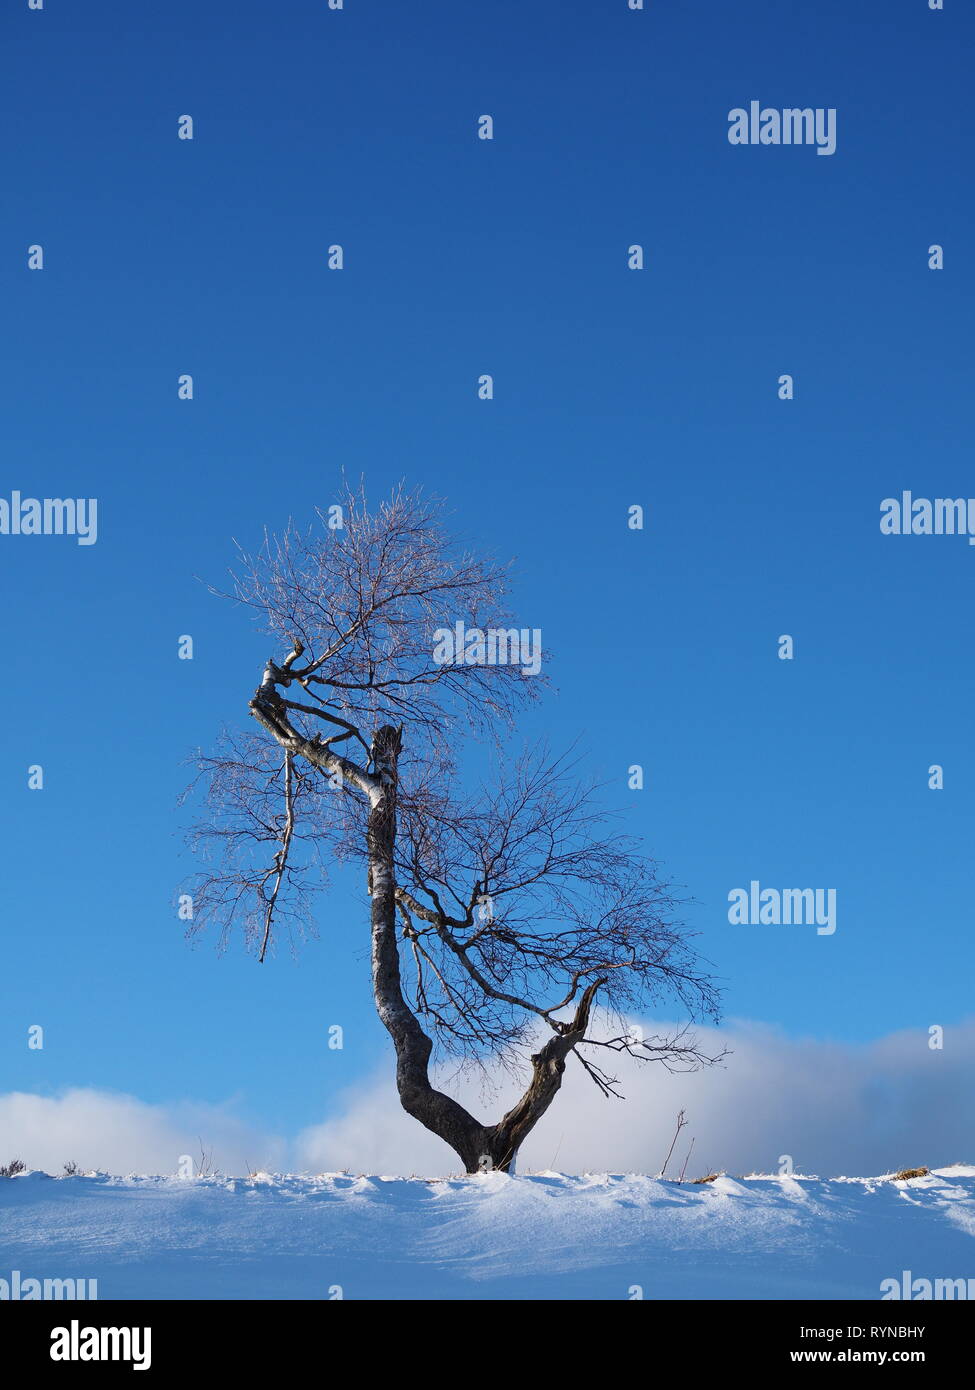 Solitary birch tree lit by the evening sun in front of a blue sky in a snowy winter landscape Stock Photo